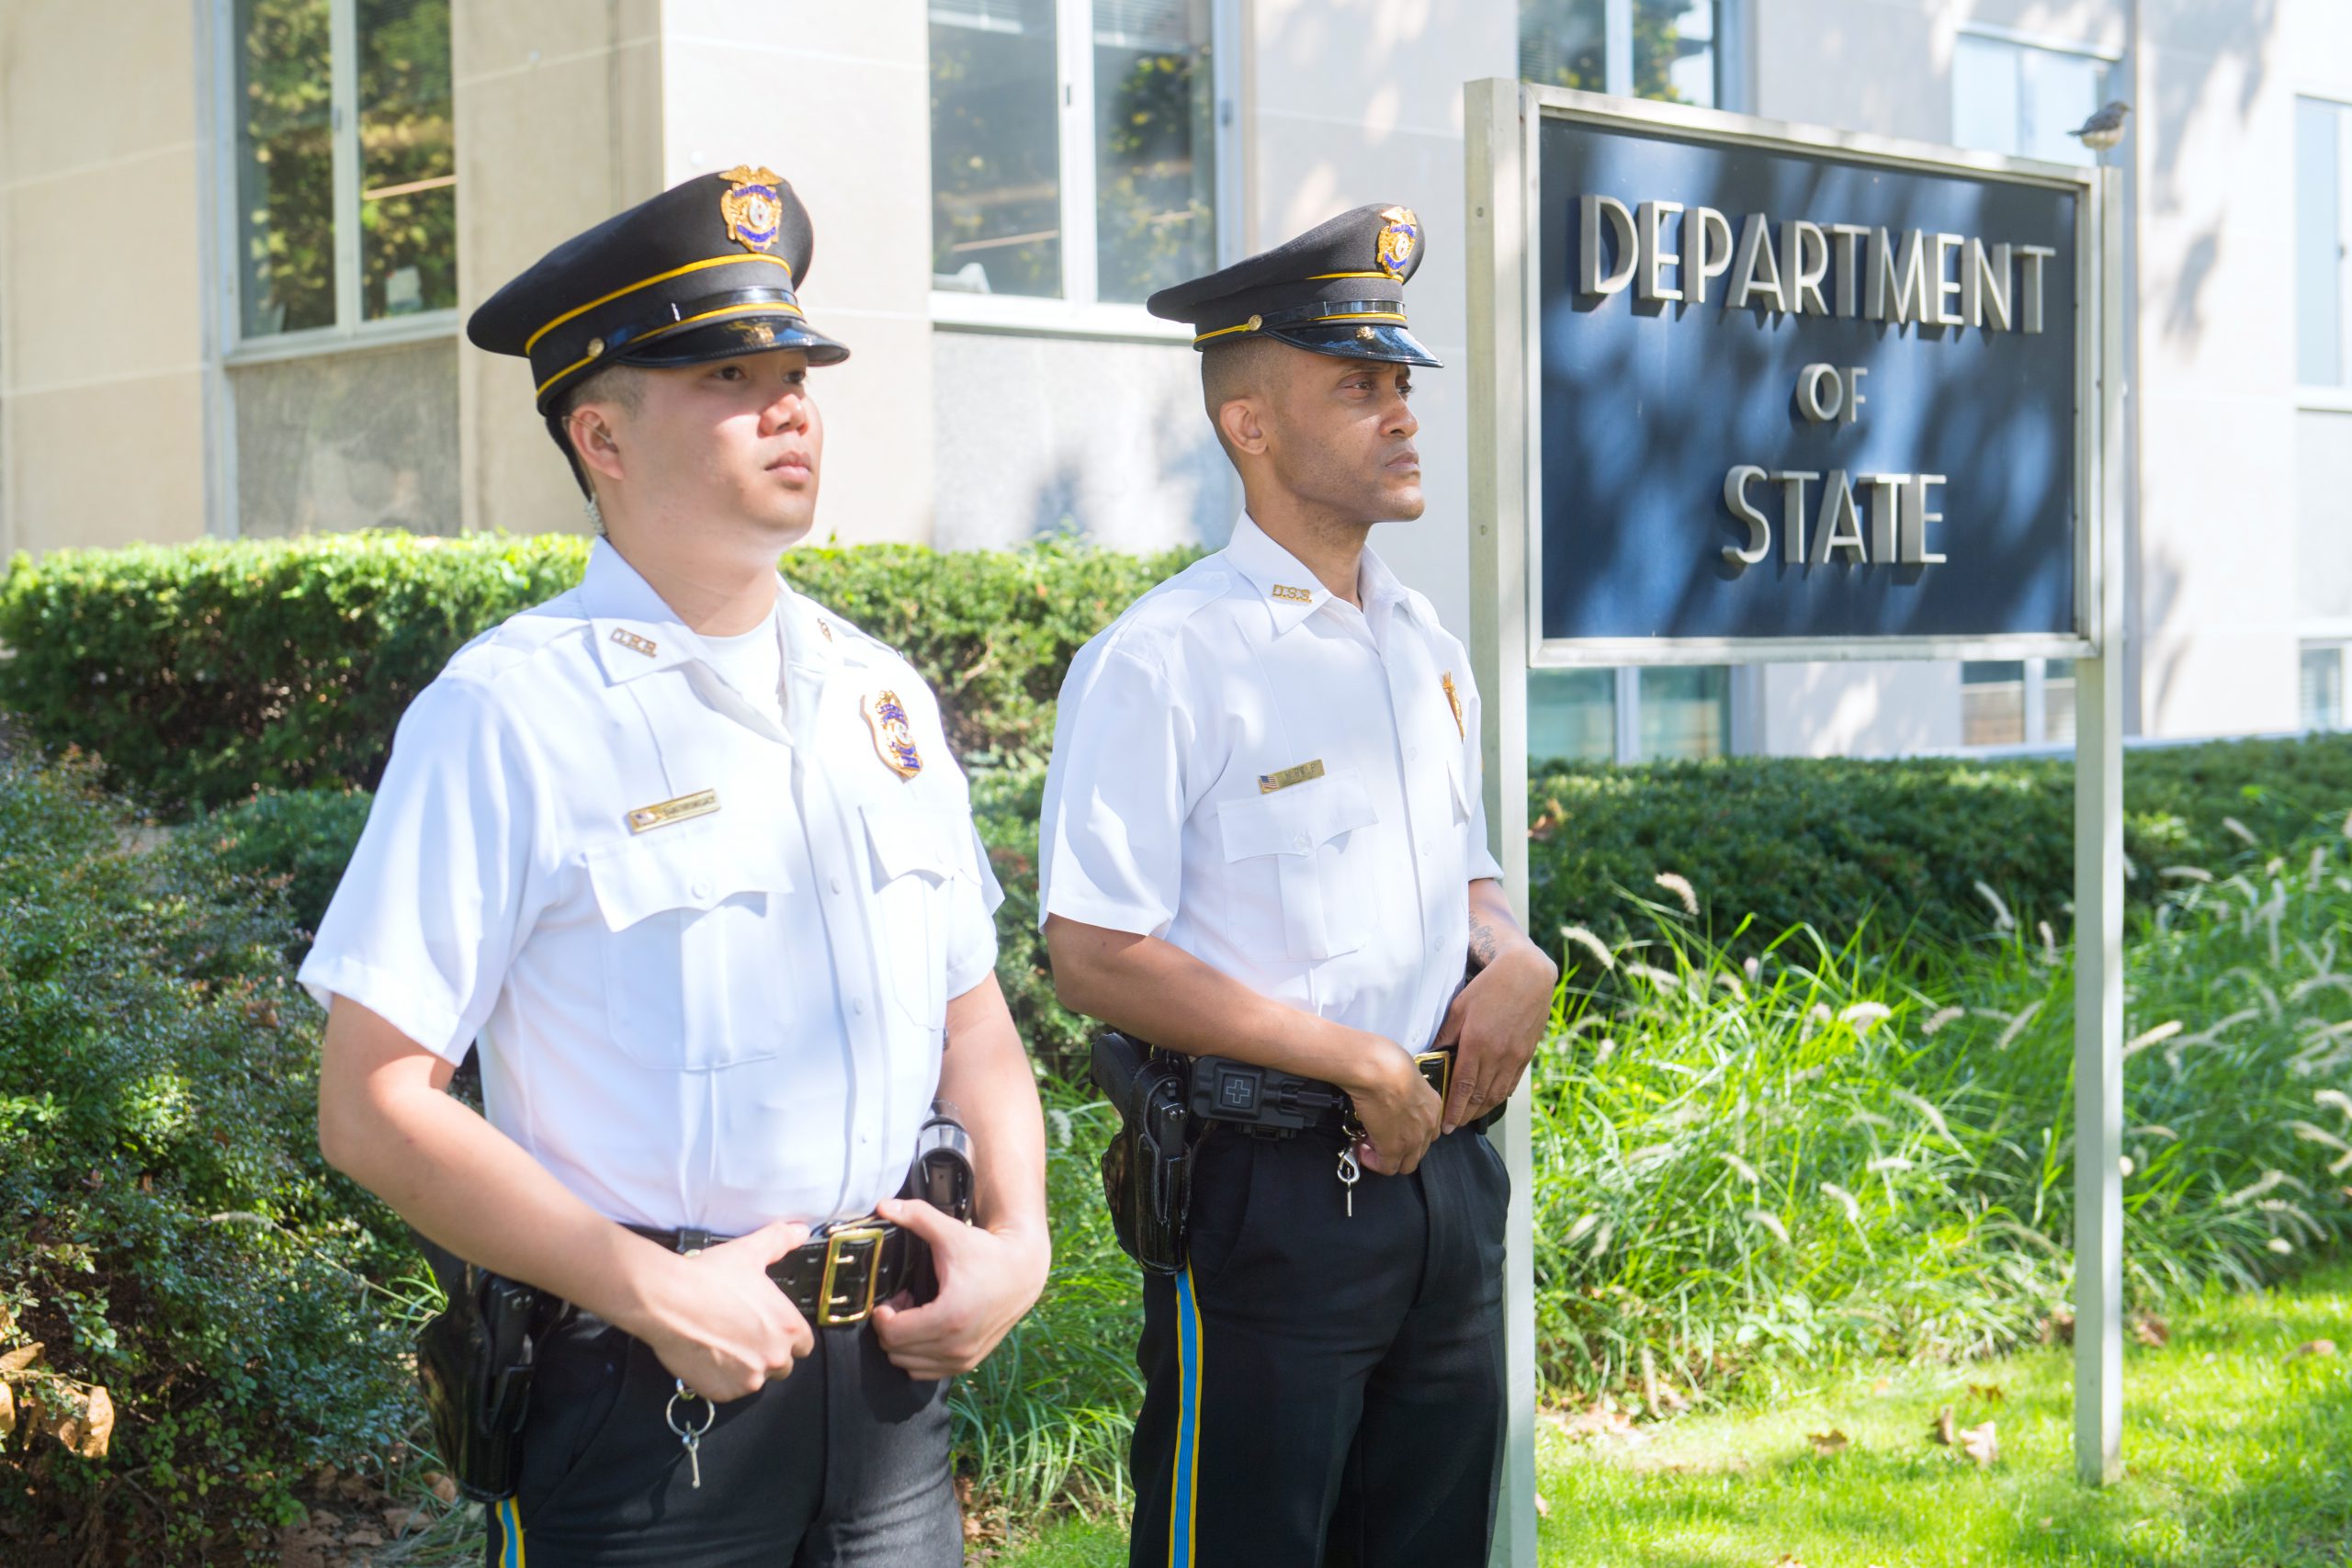 Security Officers standing outside of department of state building